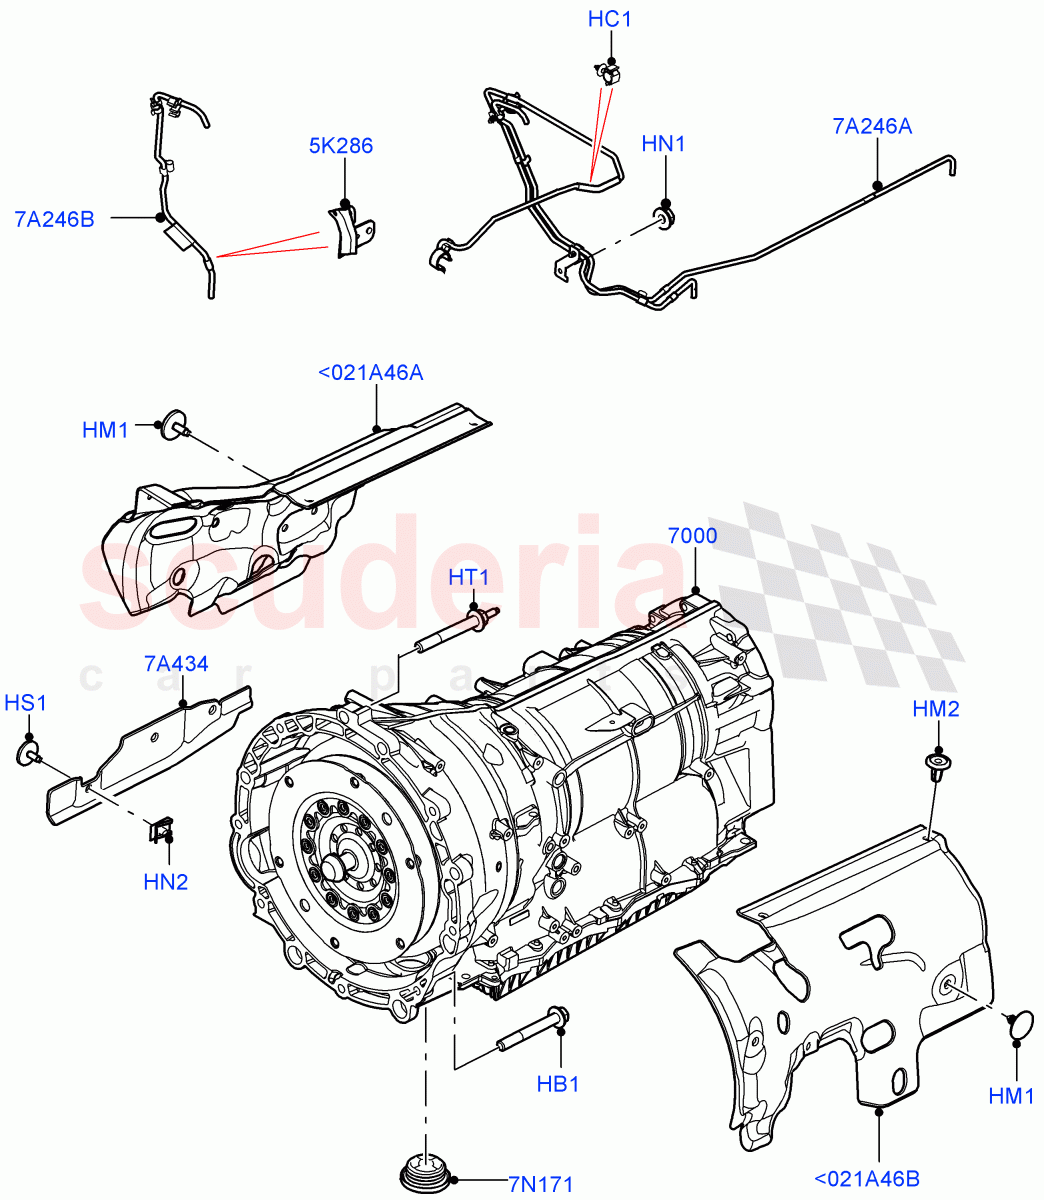 Auto Trans Assy & Speedometer Drive(Nitra Plant Build)(3.0L AJ20D6 Diesel High,8 Speed Auto Trans ZF 8HP76)((V)FROMM2000001) of Land Rover Land Rover Discovery 5 (2017+) [2.0 Turbo Diesel]